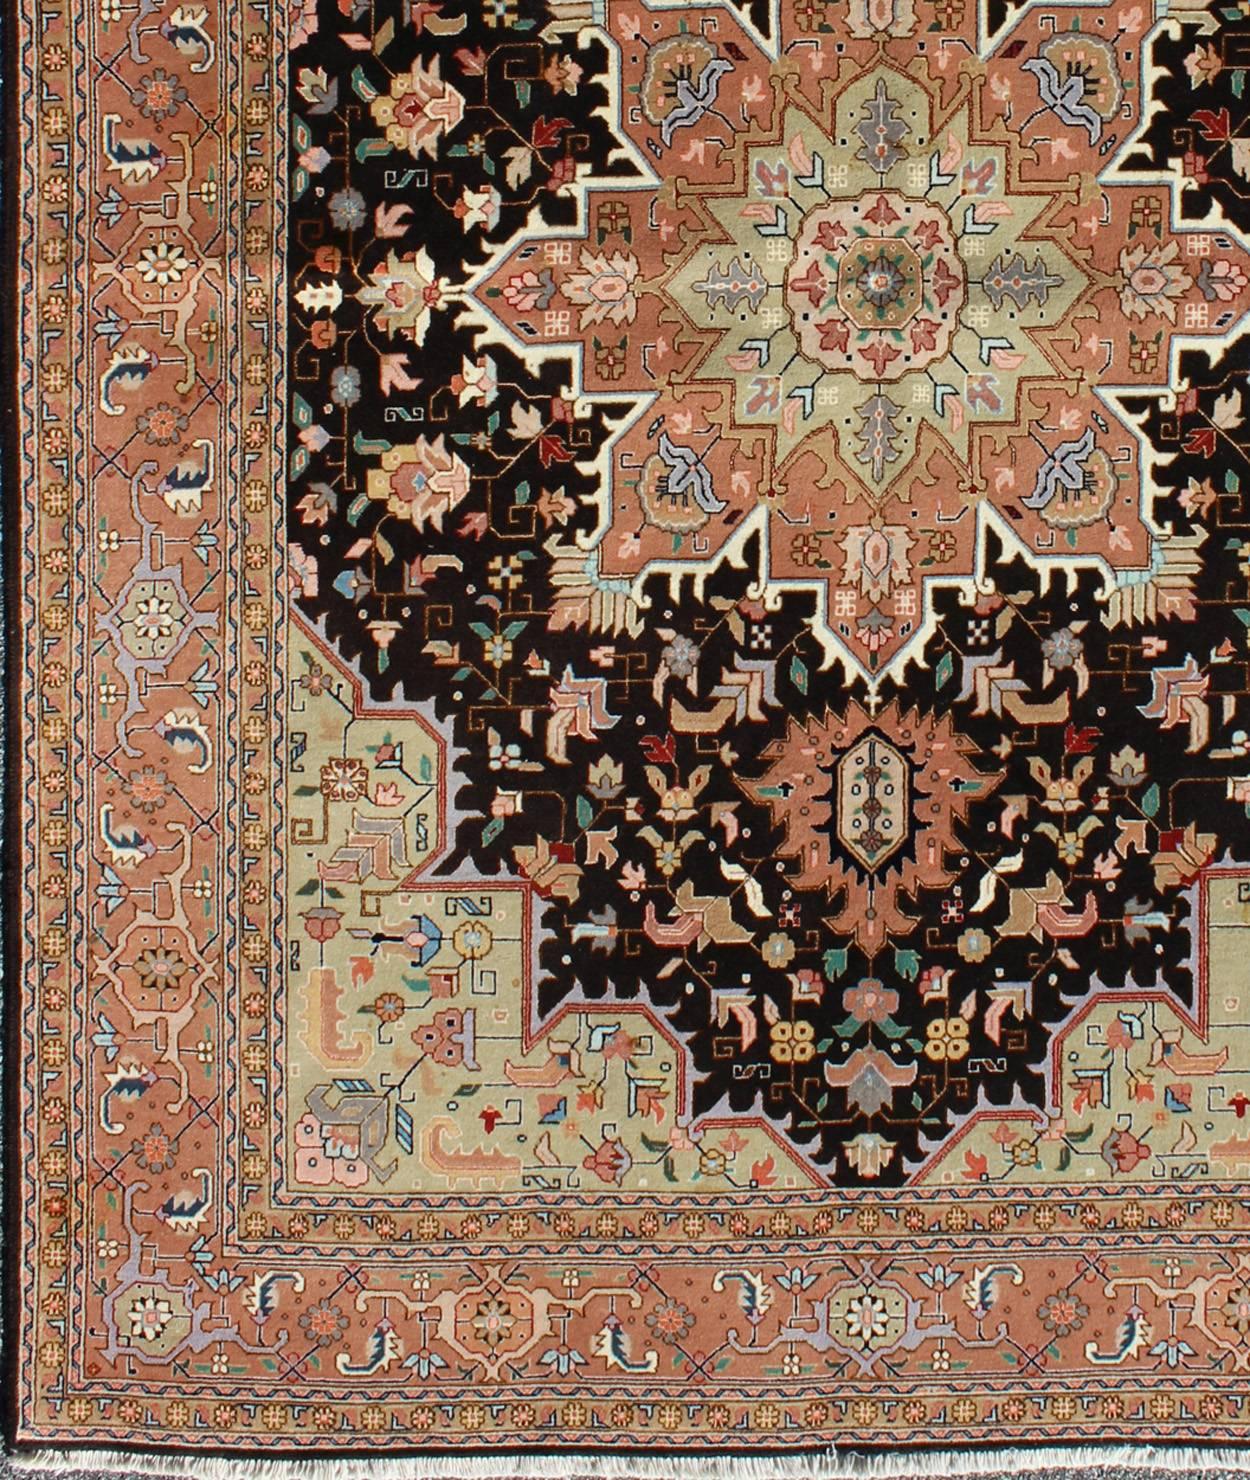 Black background Persian vintage Tabriz carpet with intricate floral elements, rug lok-1176, country of origin / type: Iran / Tabriz, circa 1970

This outstanding antique Persian Tabriz carpet (circa late 20th century) is primarily characterized